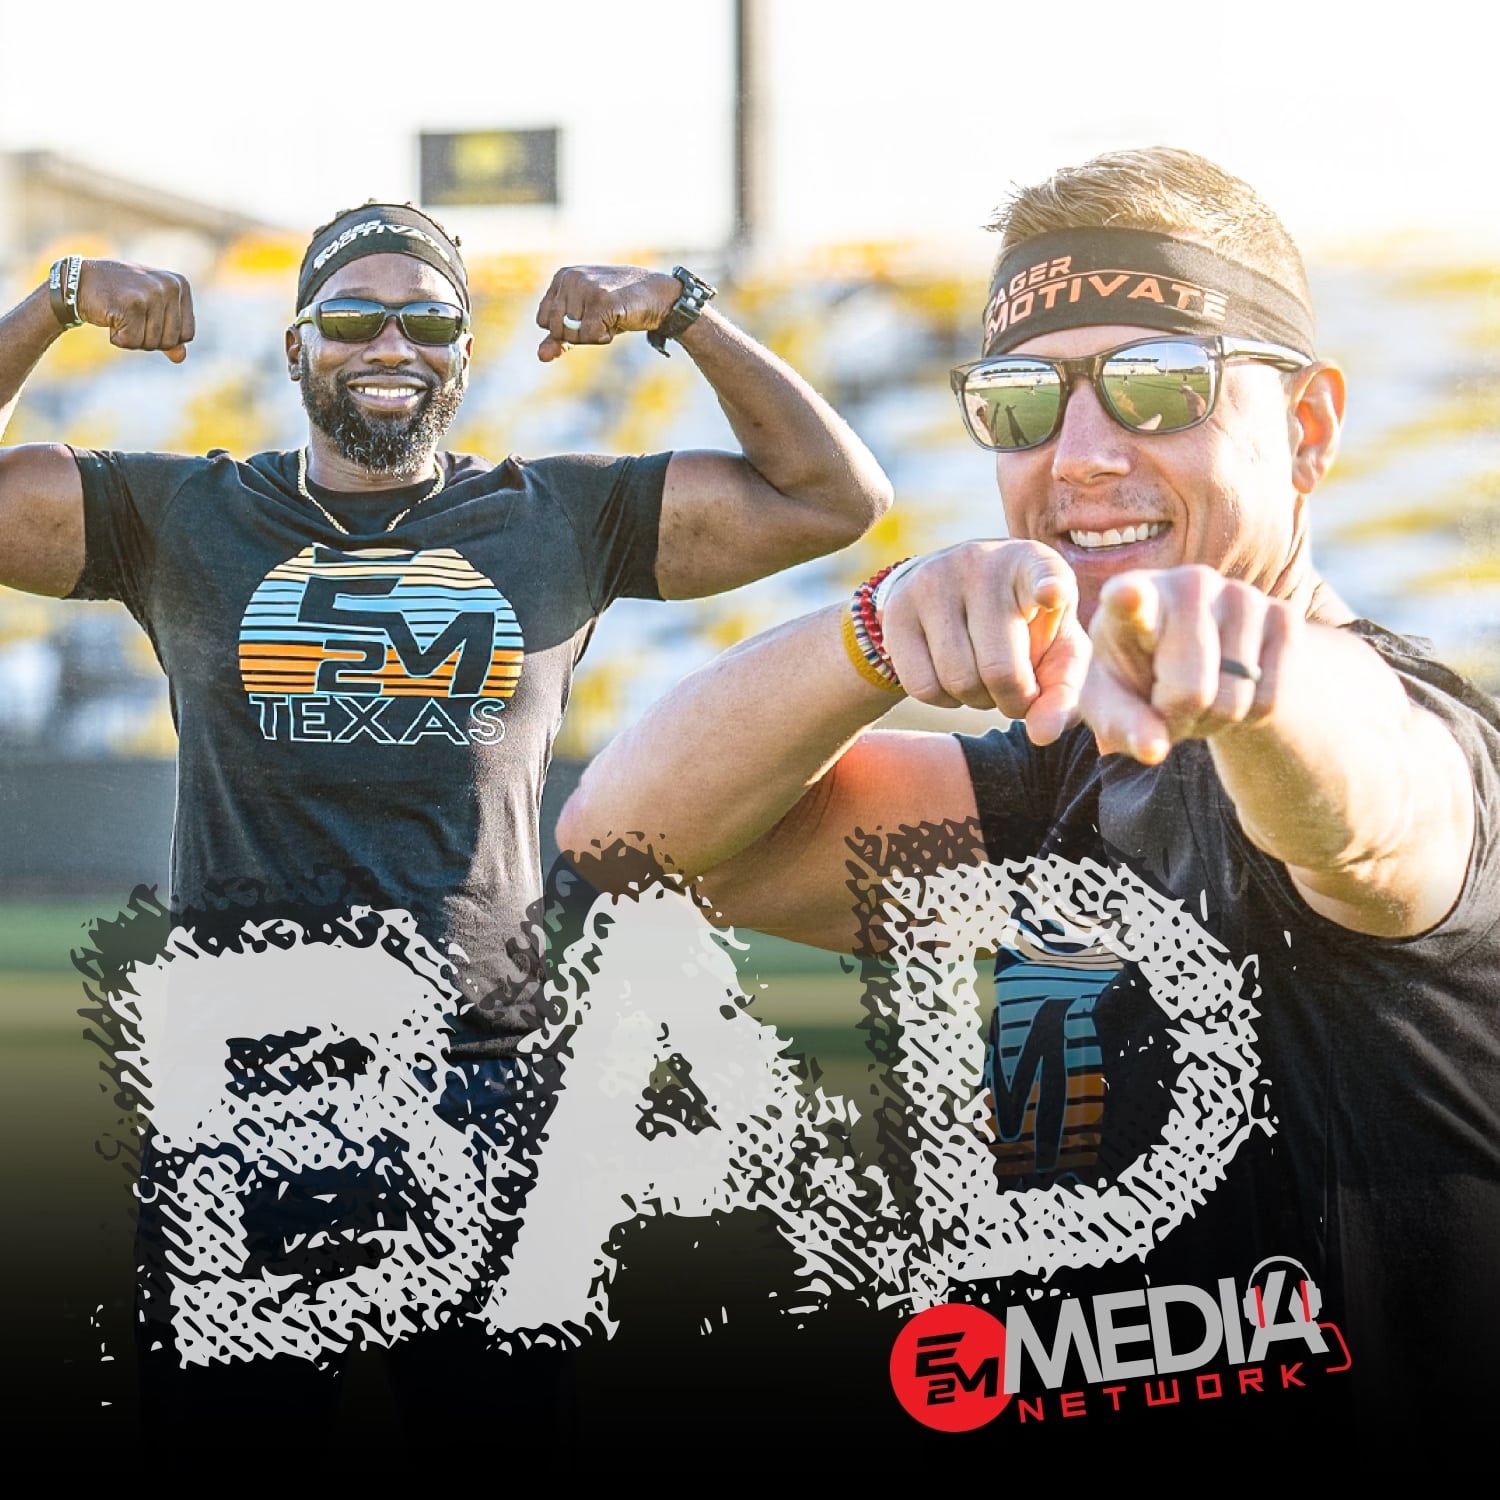 E2M Fitness Media Network – BAD Podcast – Me vs Me “Stop looking over the fence”